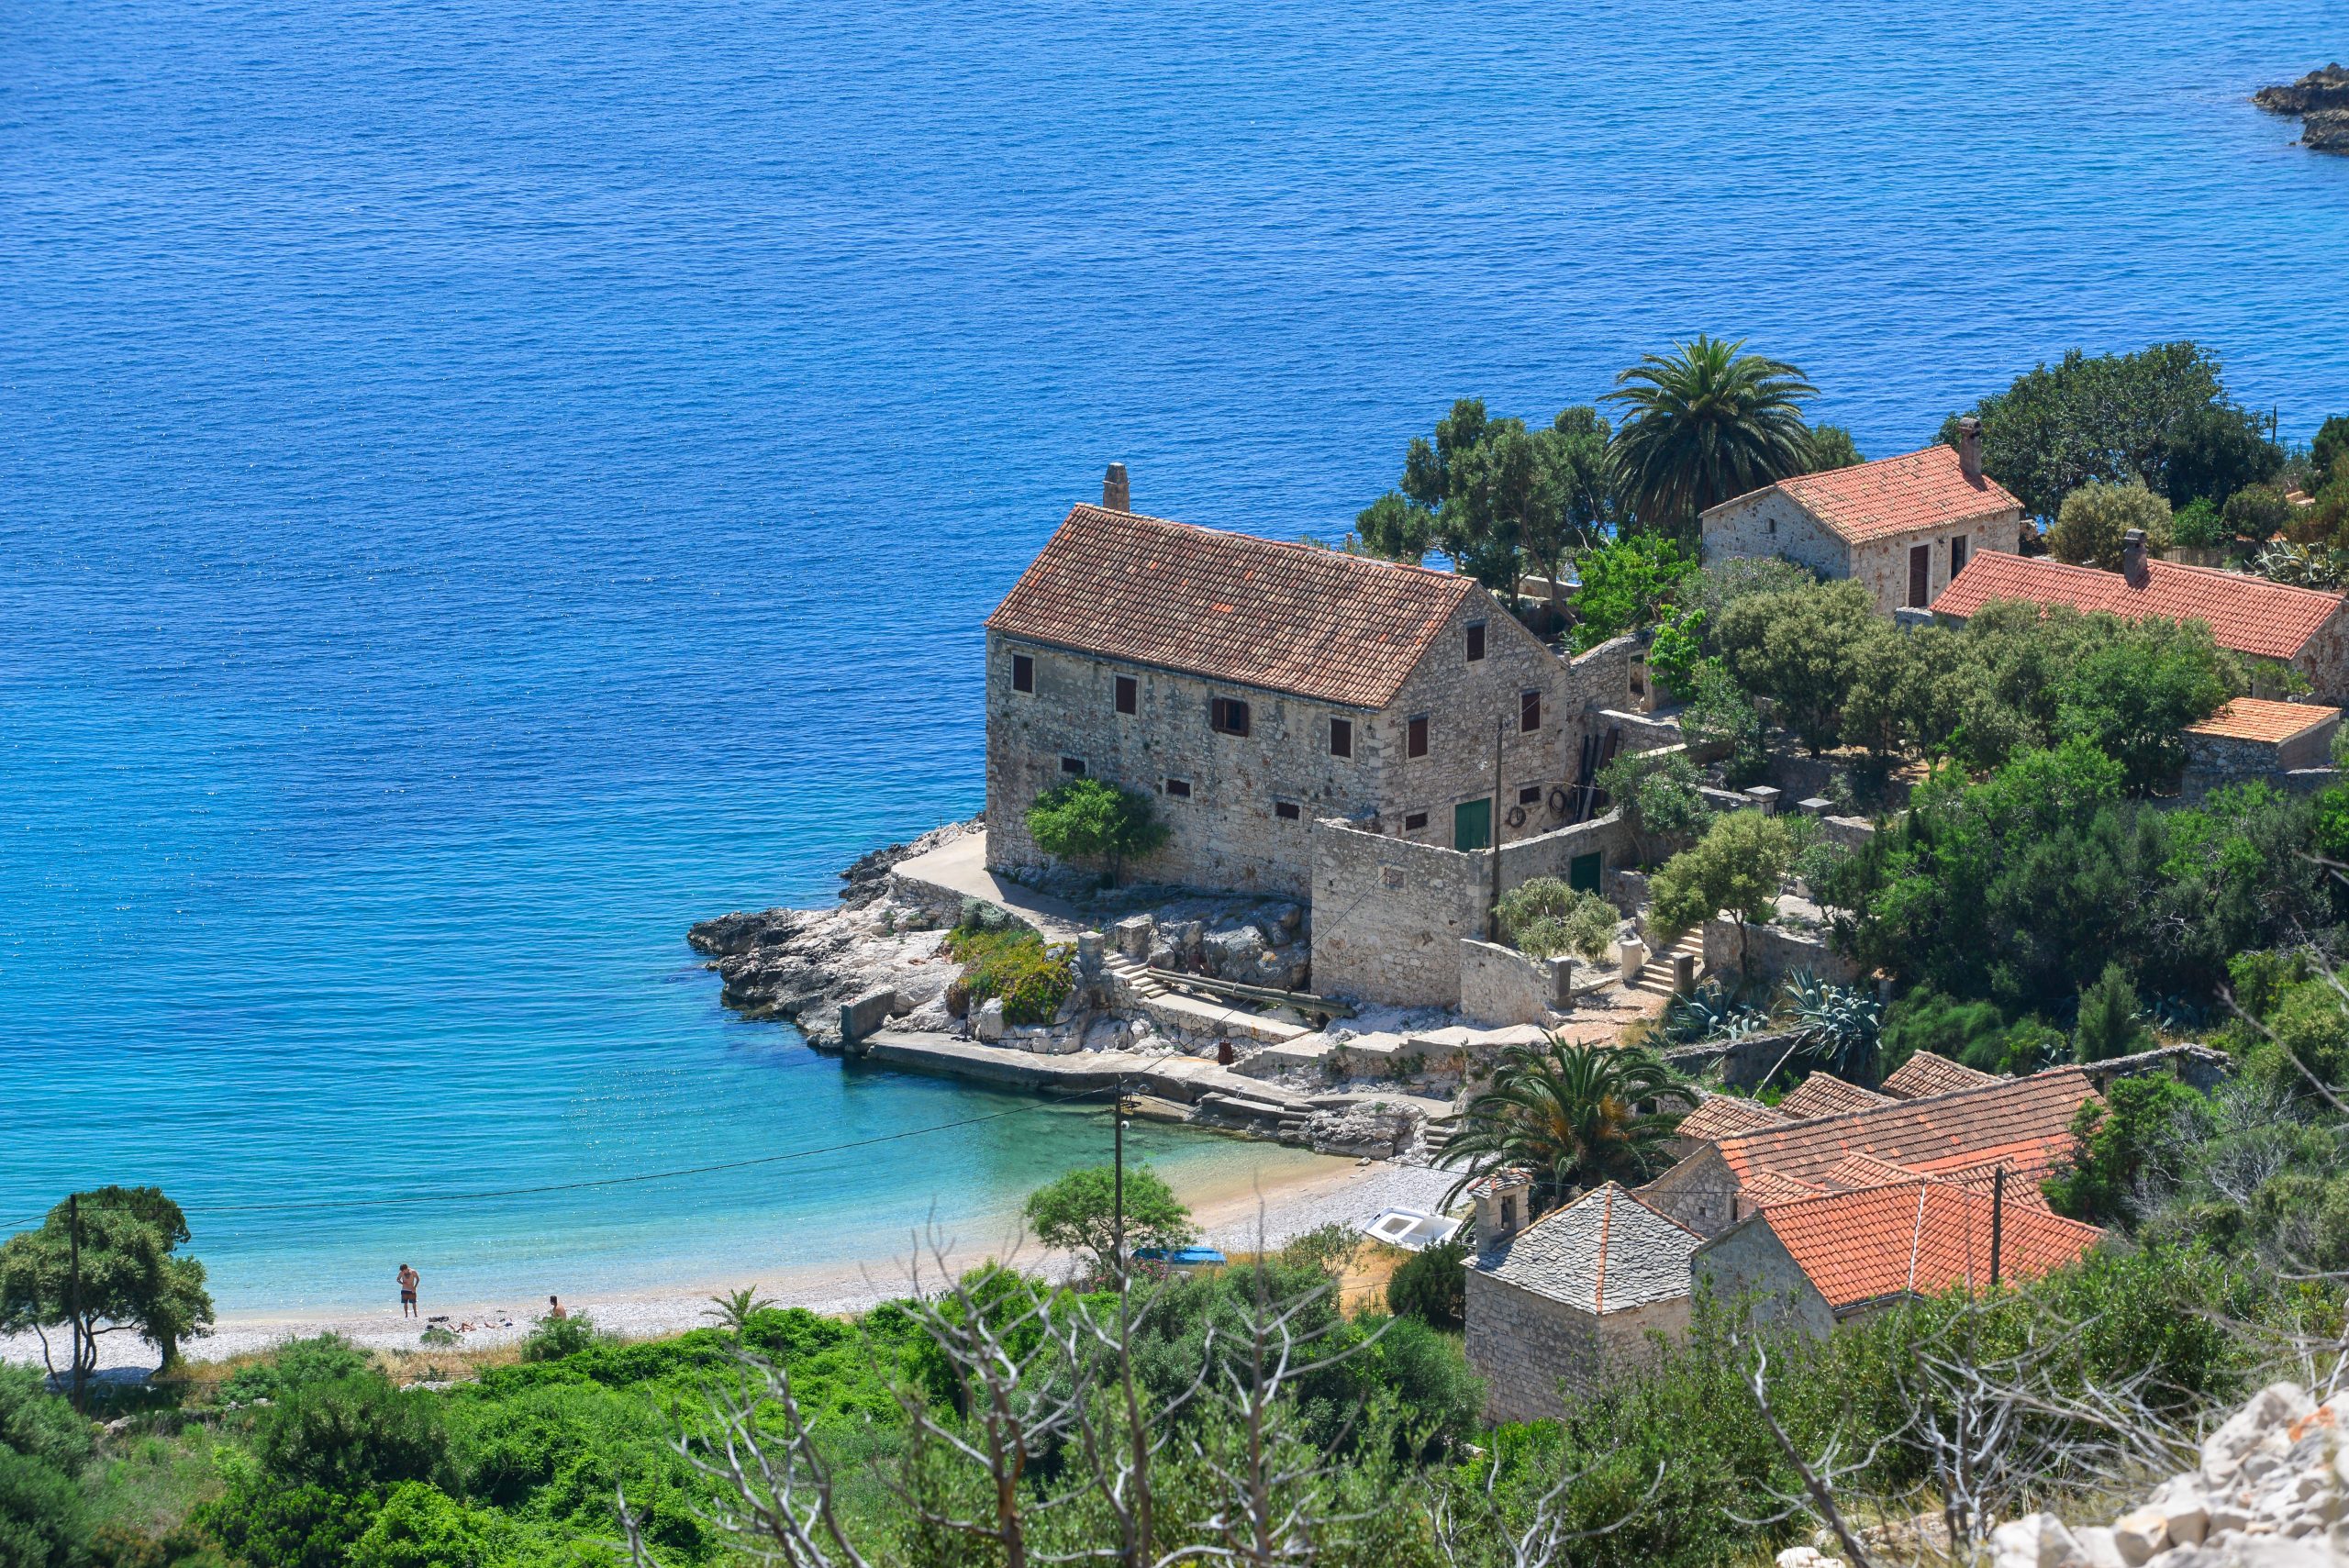 
14 most beautiful beaches in Croatia according to Lonely Planet 